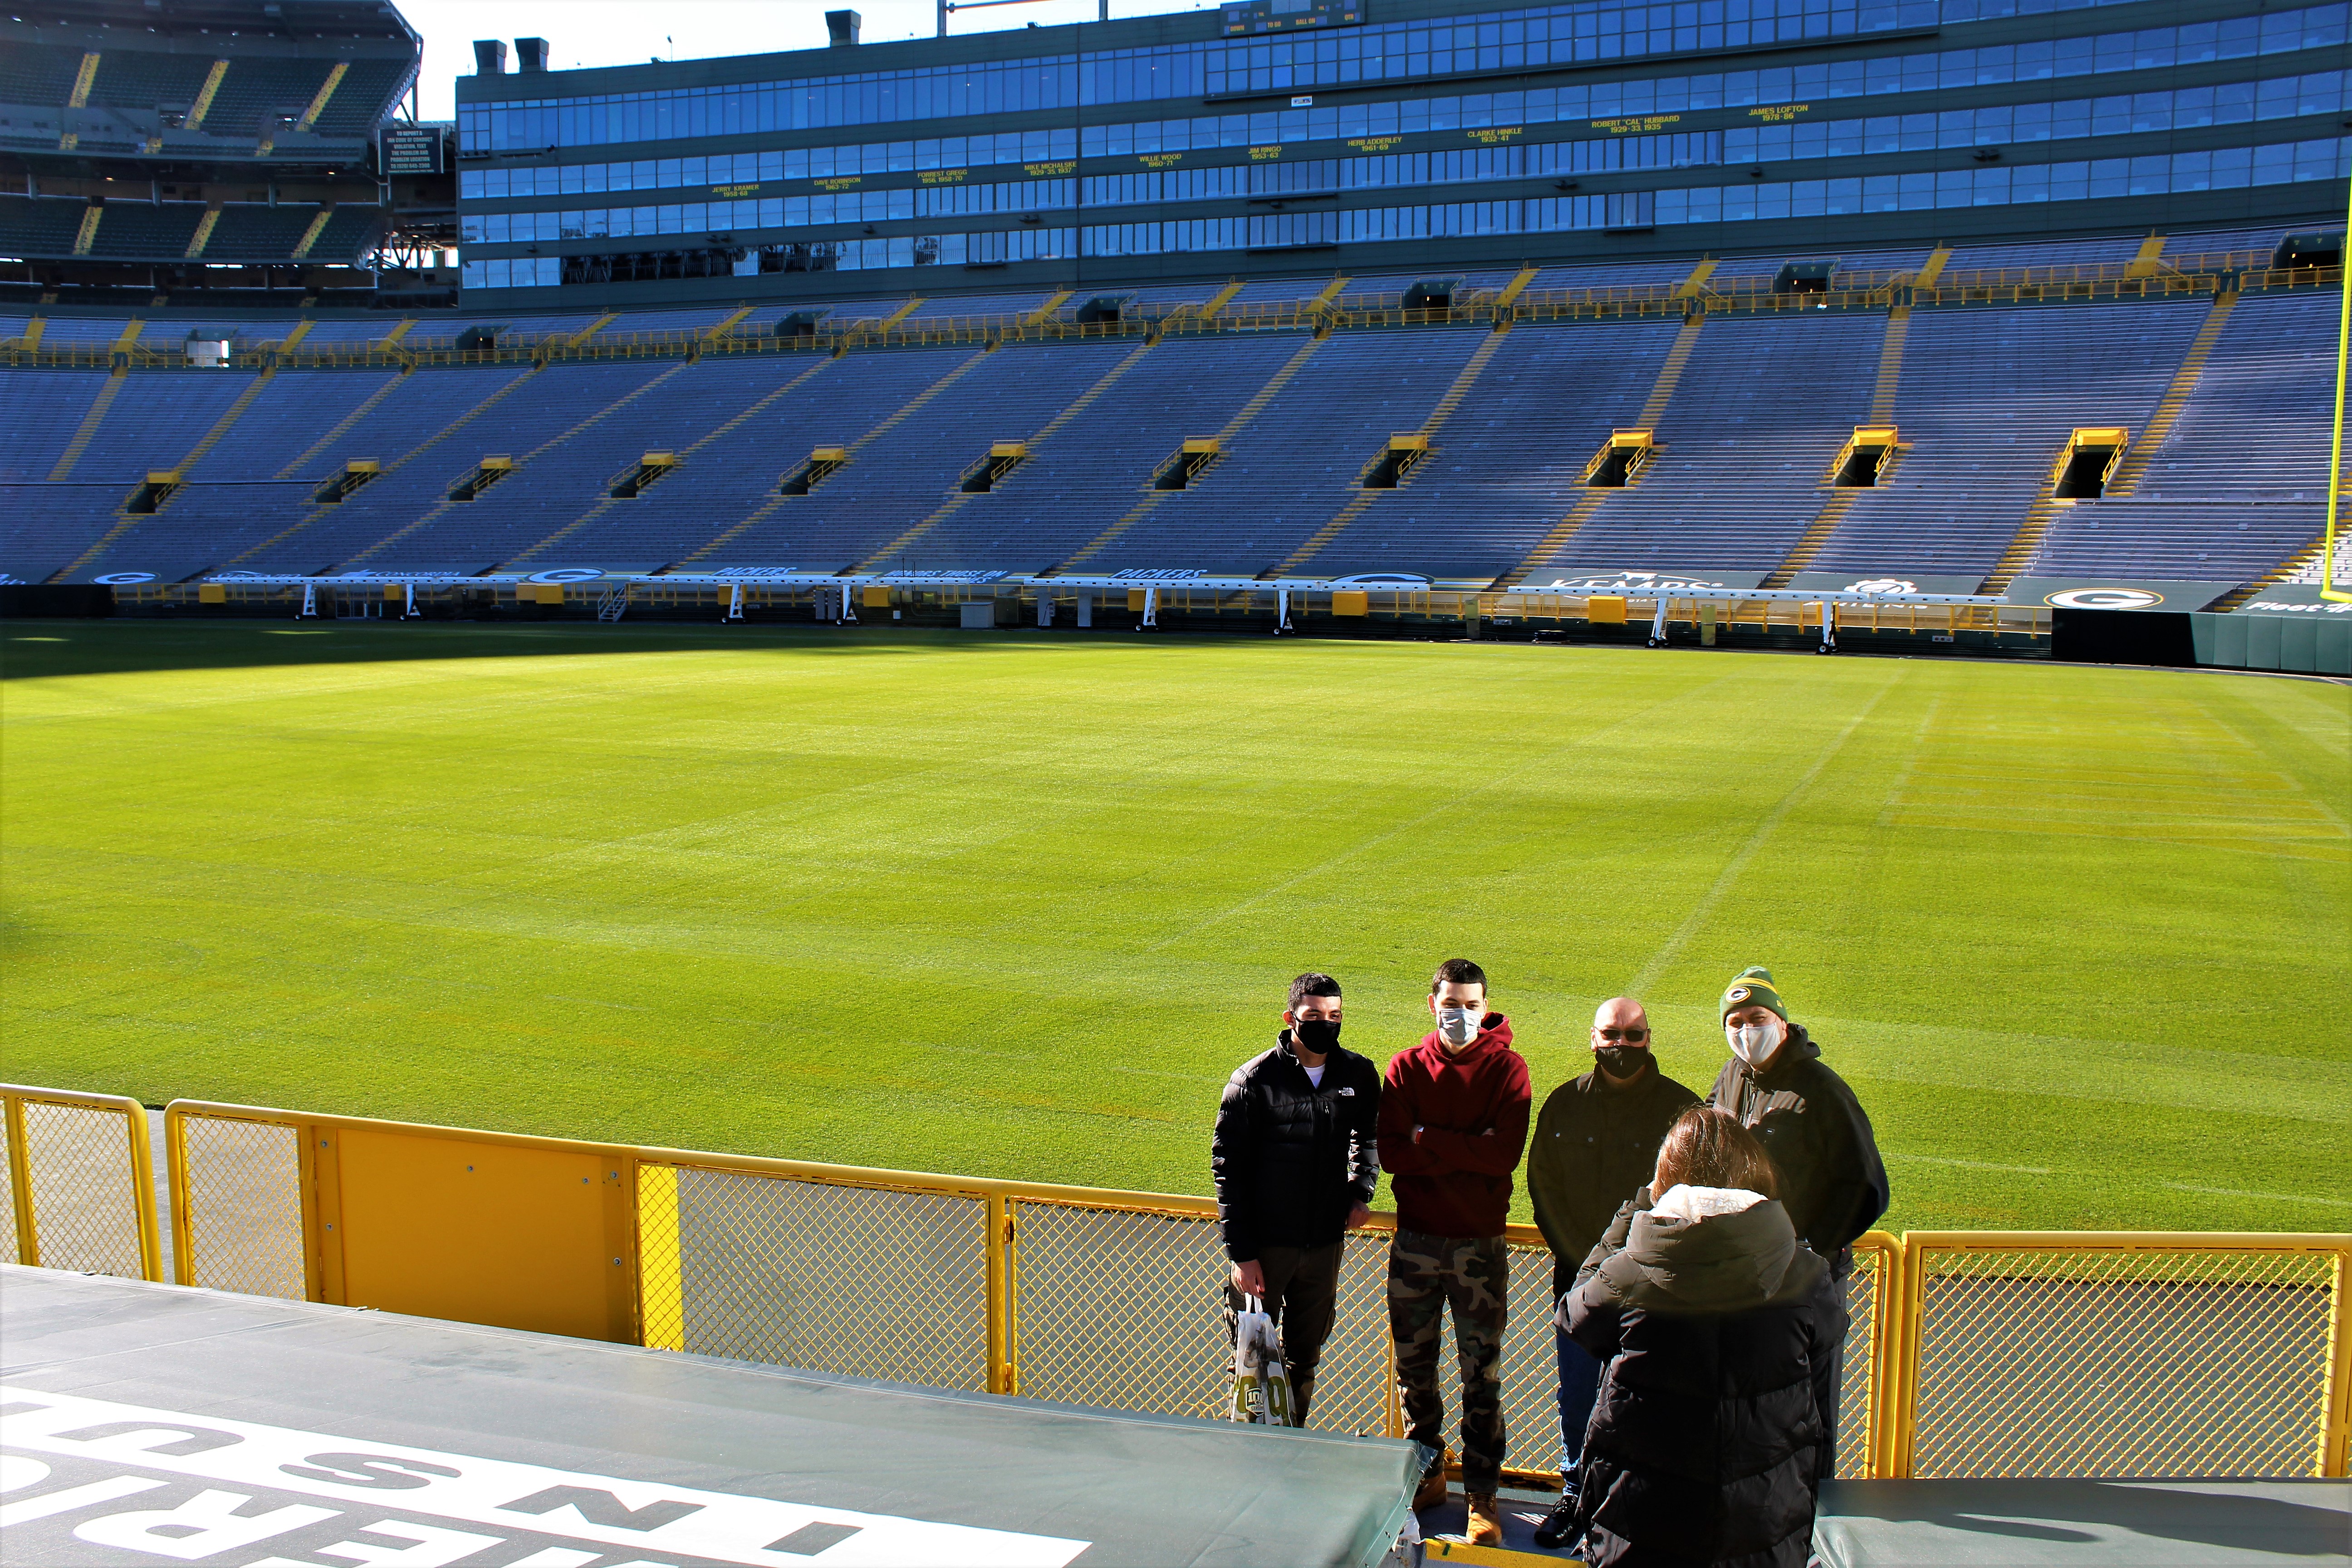 Field viewing tours now offered at Lambeau